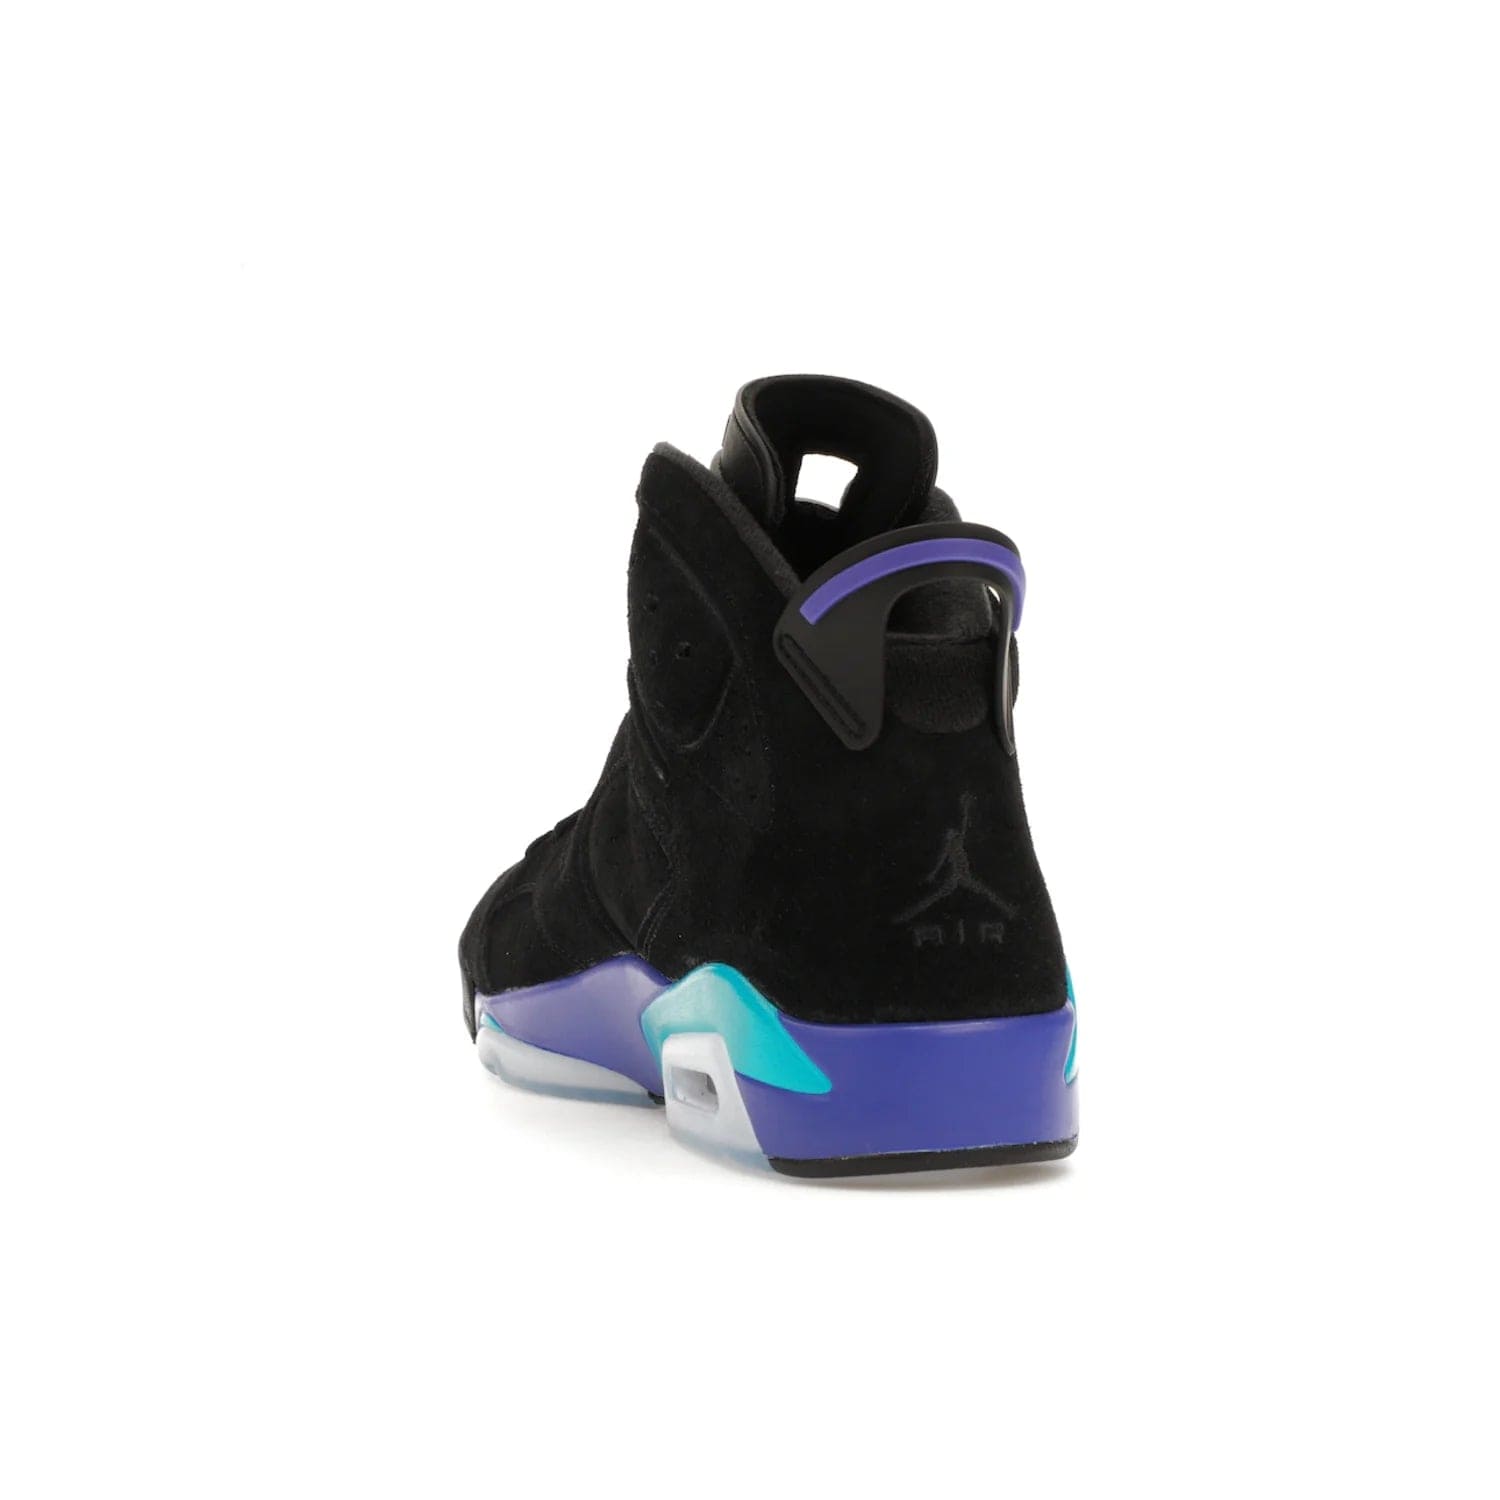 Jordan 6 Retro Aqua - Image 26 - Only at www.BallersClubKickz.com - Feel the classic Jordan 6 Retro Aqua paired with modern style. Black, Bright Concord, and Aquatone hues are crafted with a supple suede and rubberized heel tab. This standout sneaker adds signature Jordan elements at $200. Elevate your style with the Jordan 6 Retro Aqua.